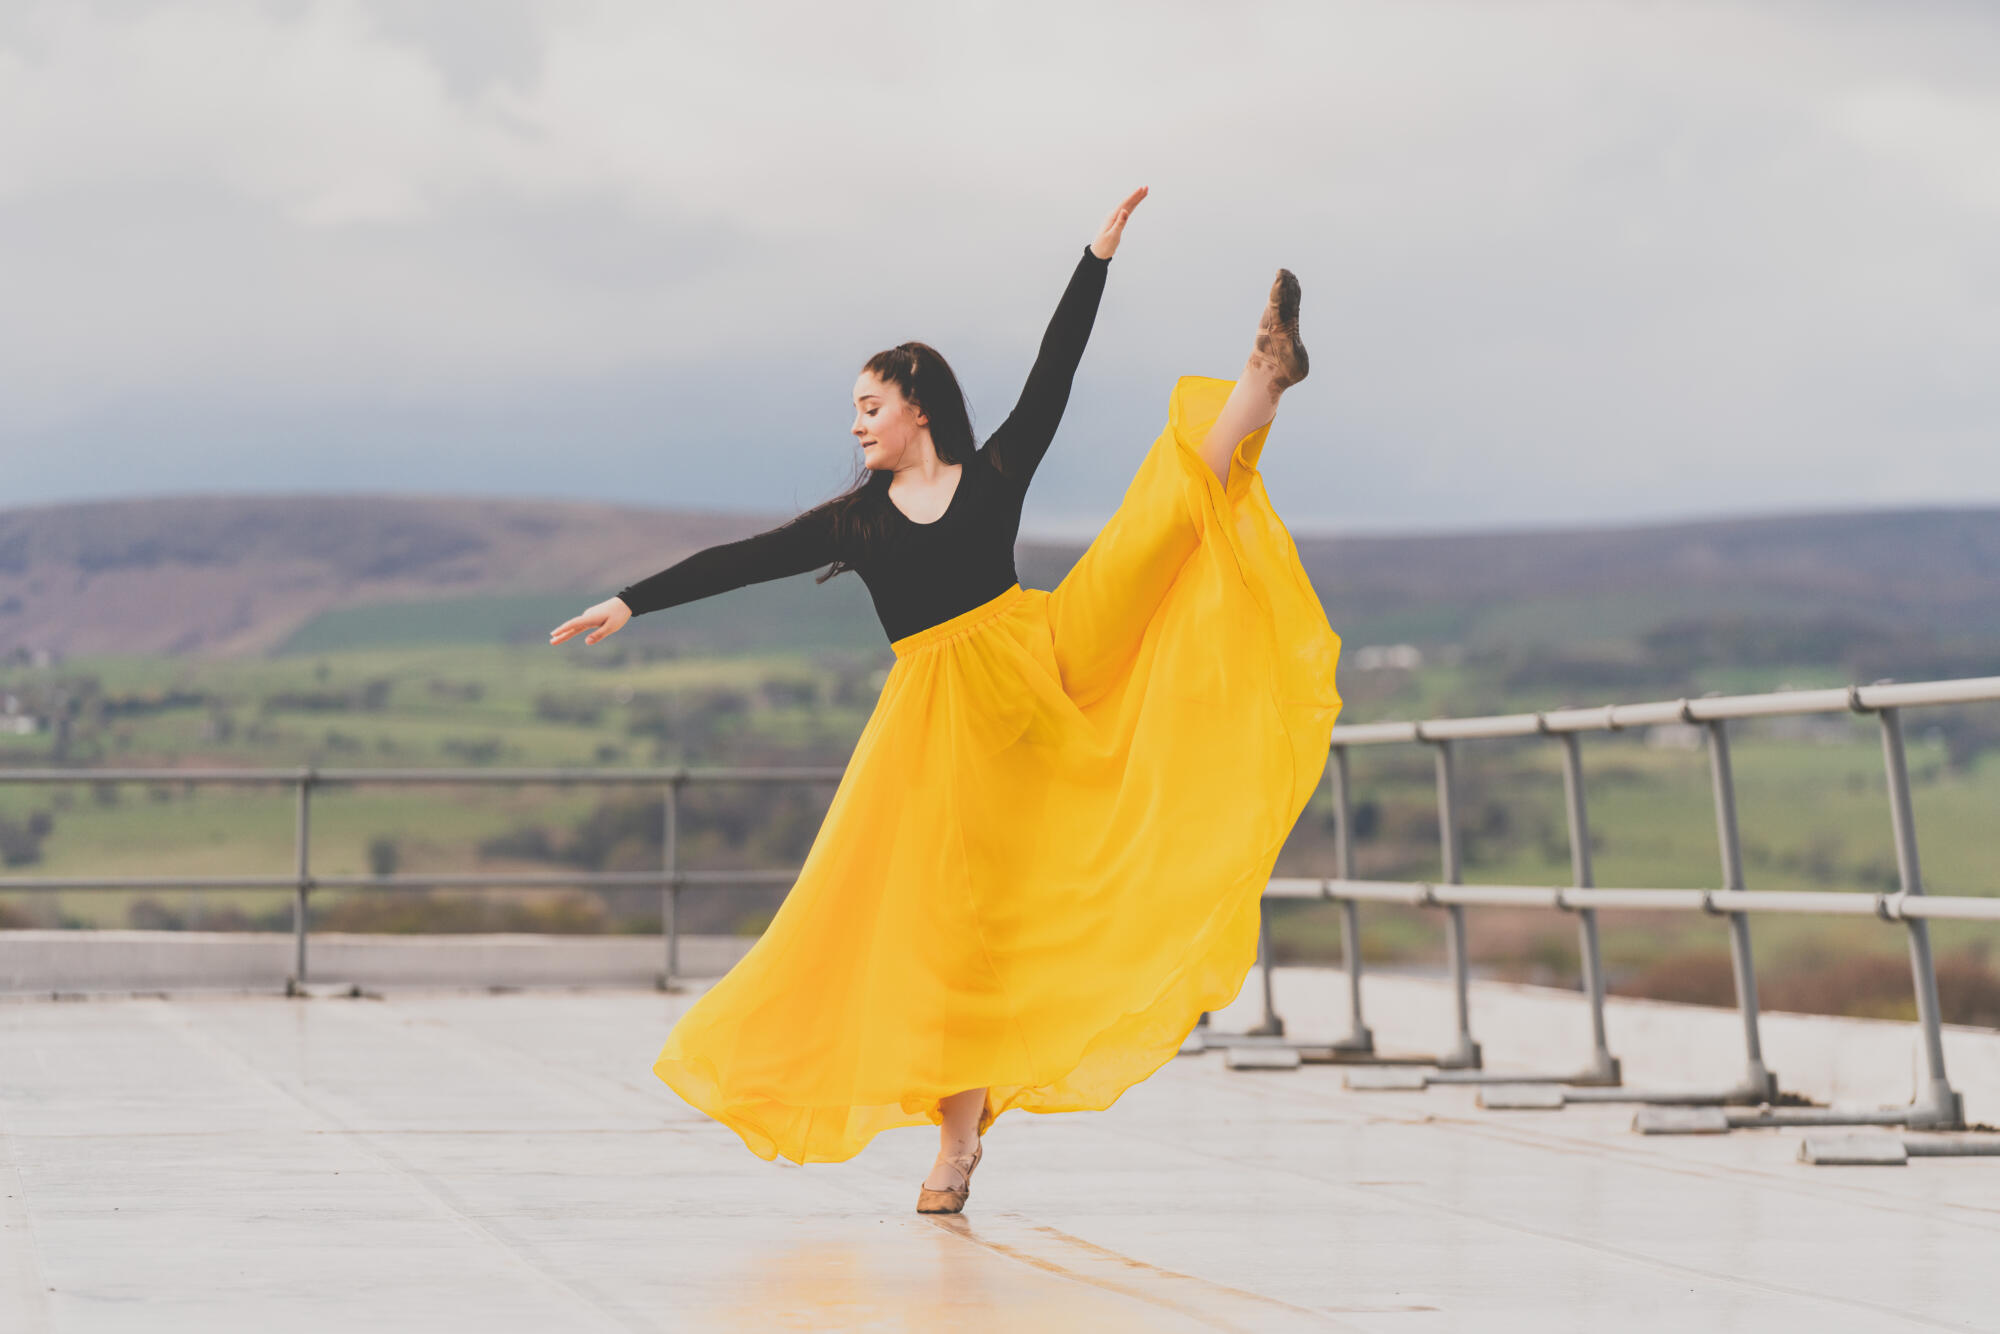 A spectacular shot of a dancer in a bright yellow skirt on to of a building with the skyline of Burnley n the background